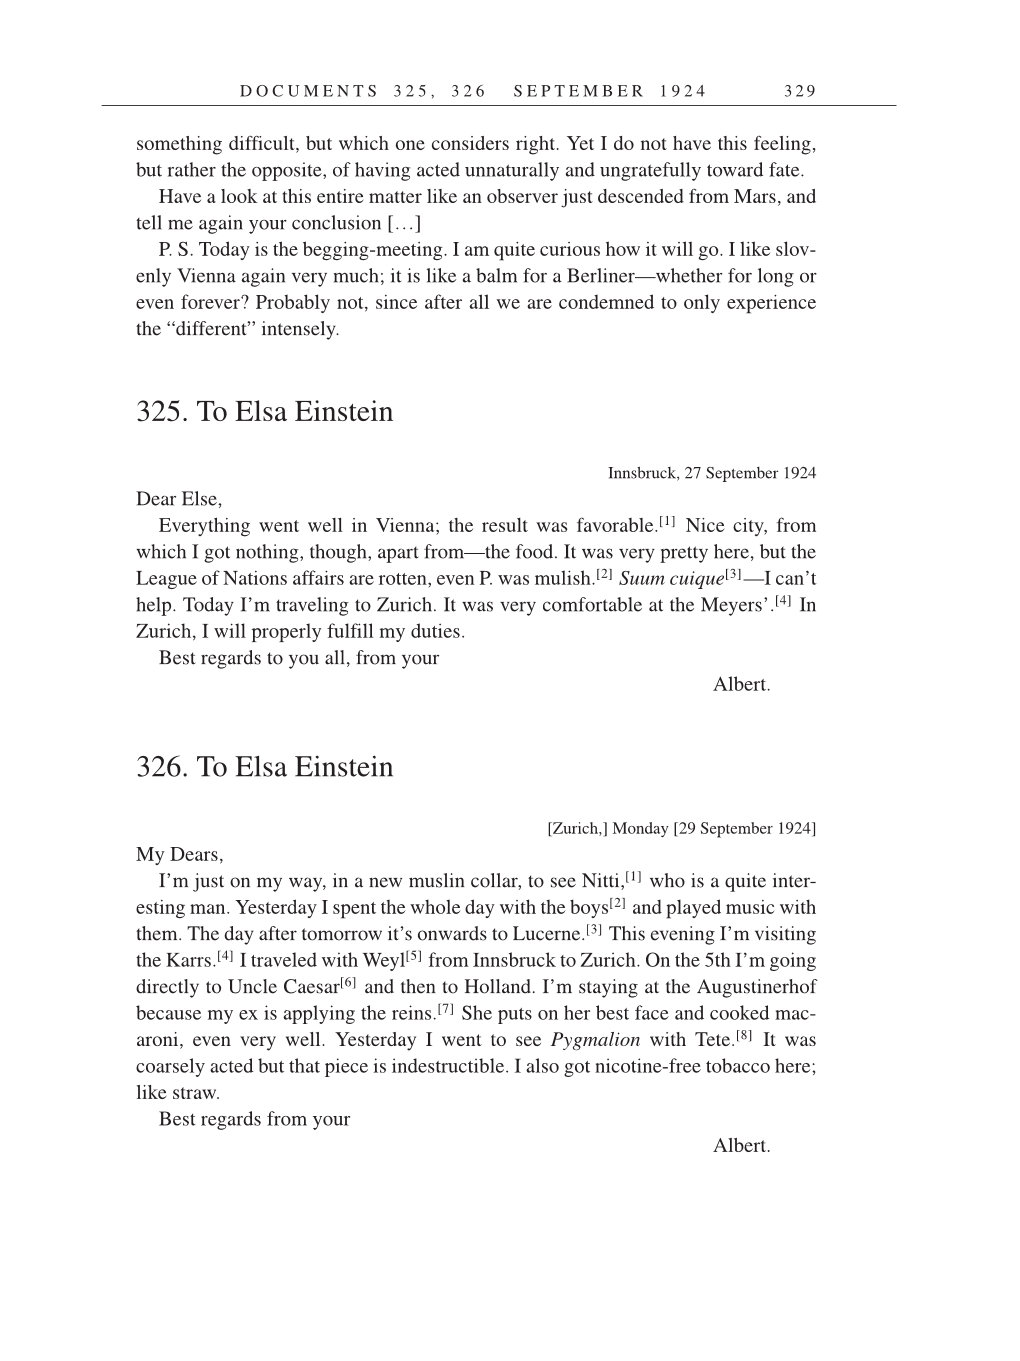 Volume 14: The Berlin Years: Writings & Correspondence, April 1923-May 1925 (English Translation Supplement) page 329